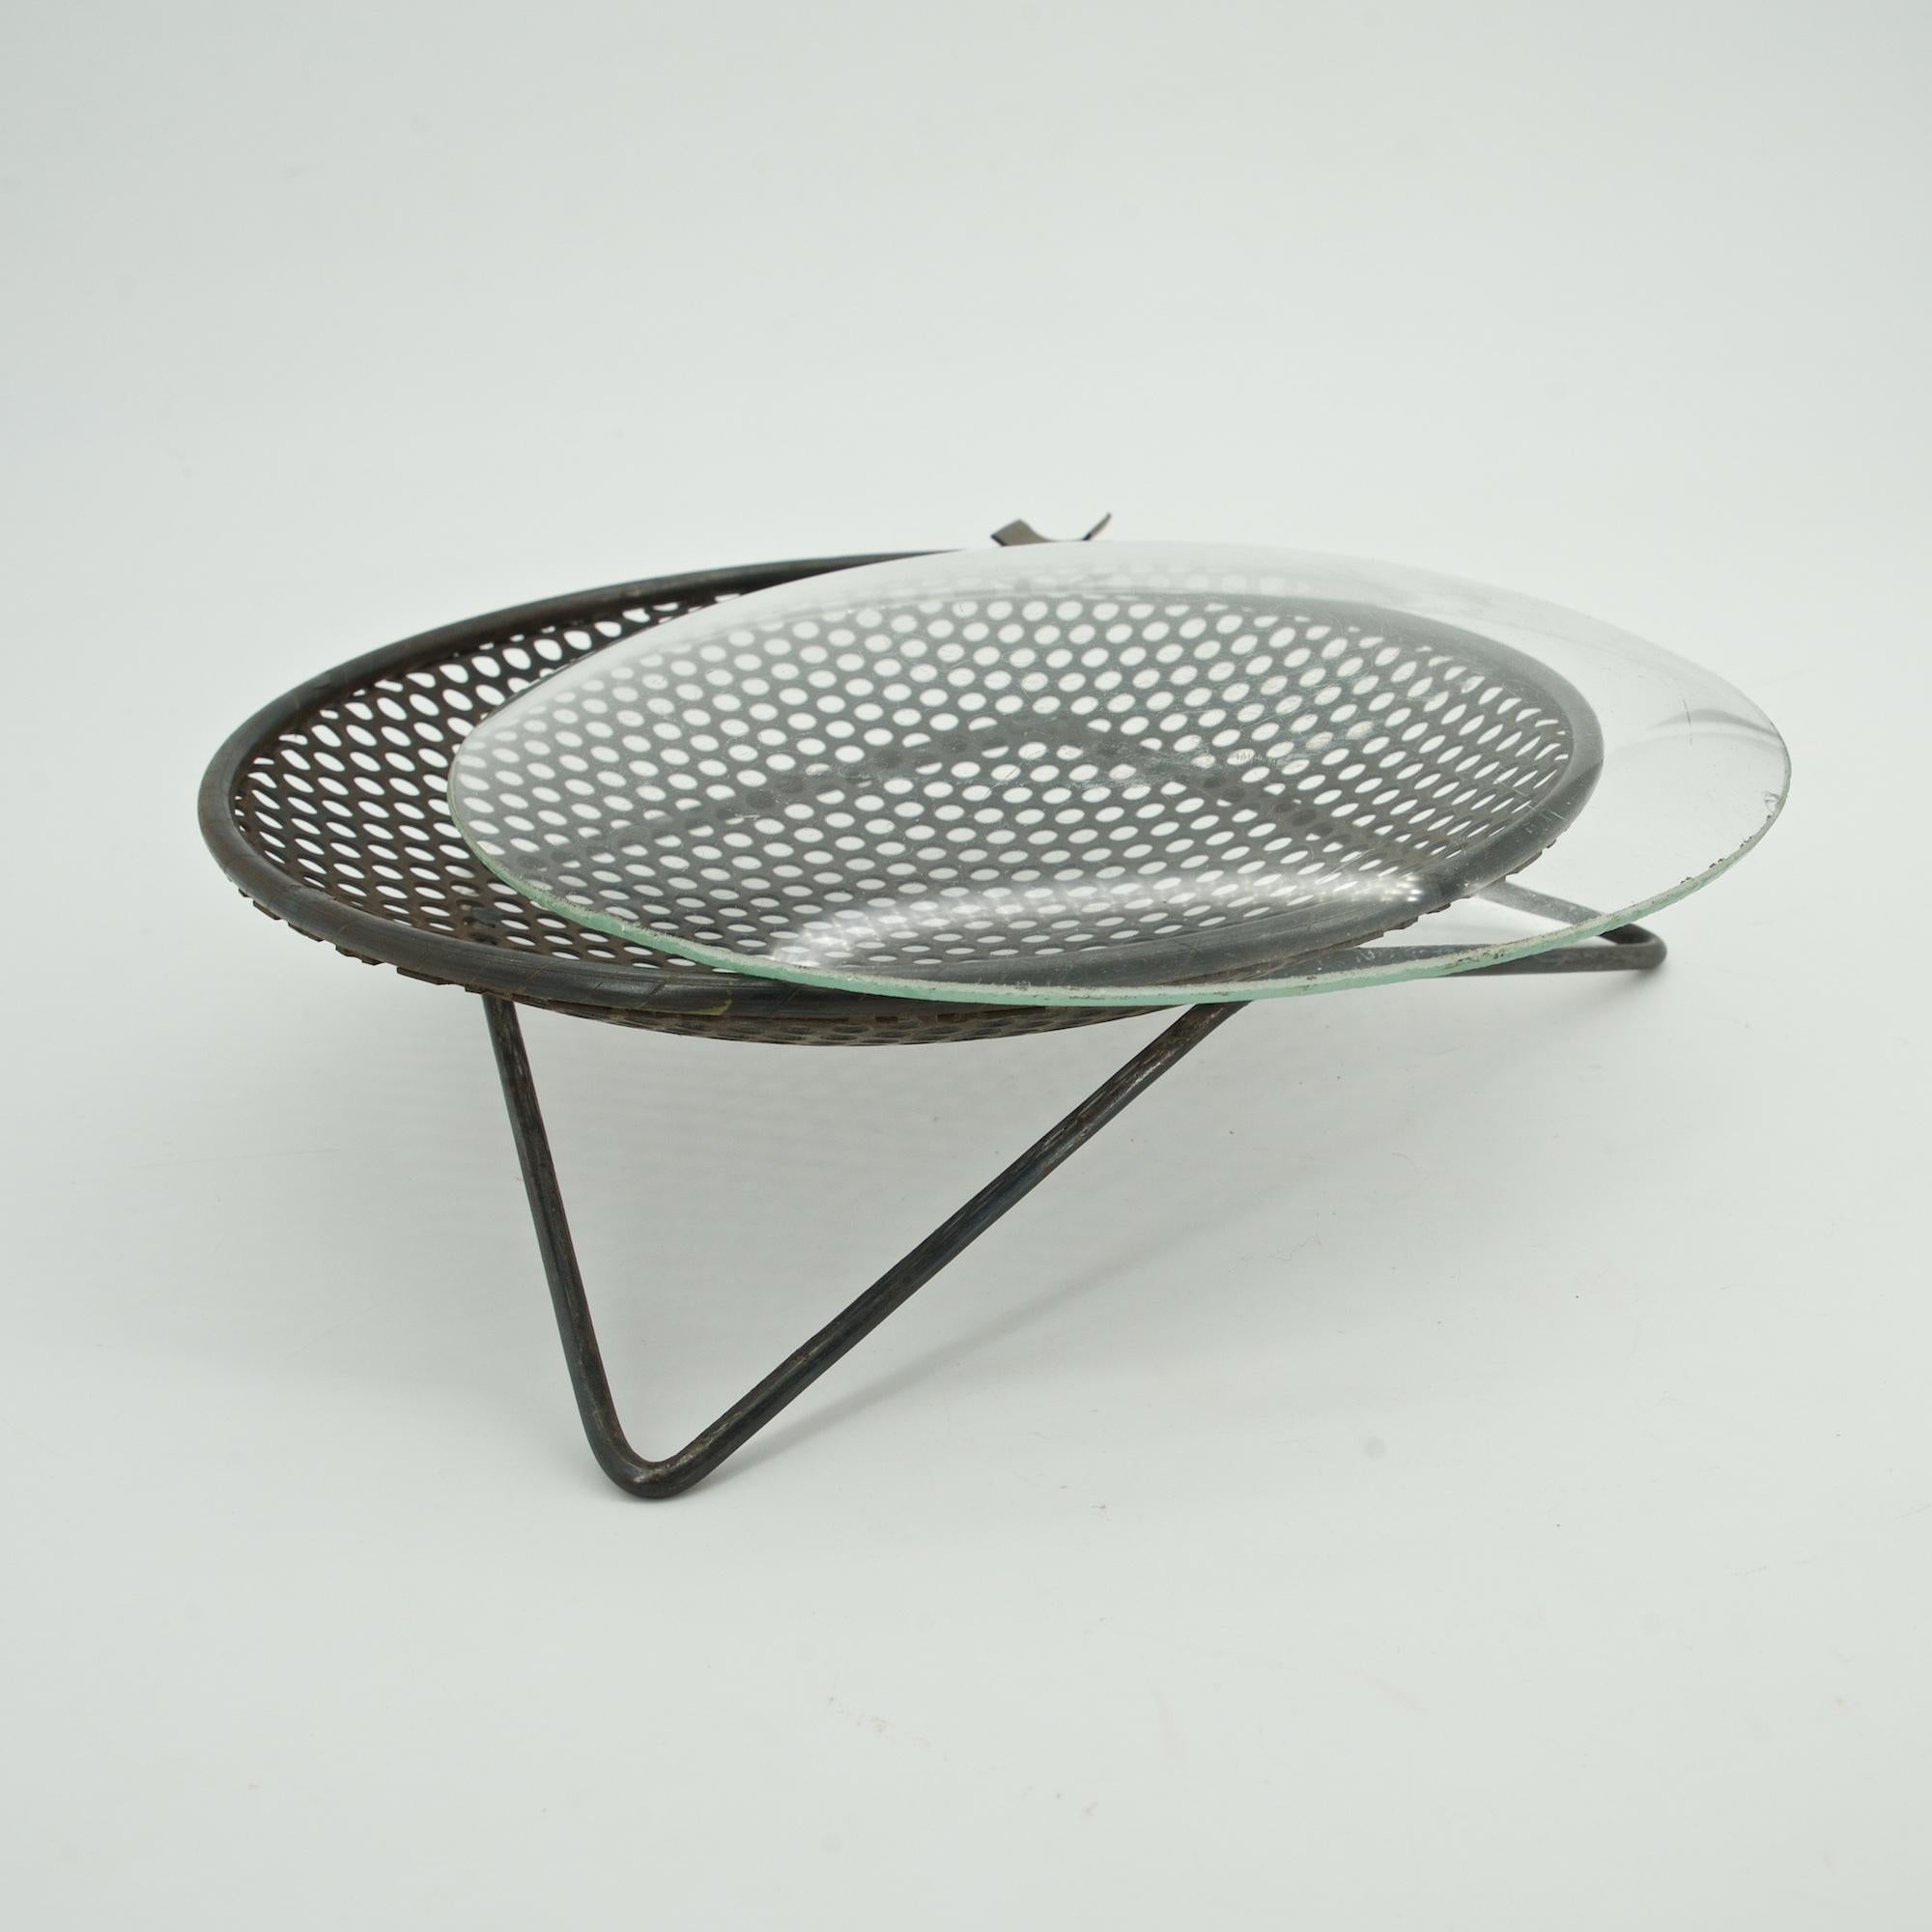 1950s Perforated Metal Atomic Dish Ashtray Nº S30 by Richard Galef Ravenware In Good Condition For Sale In Hyattsville, MD